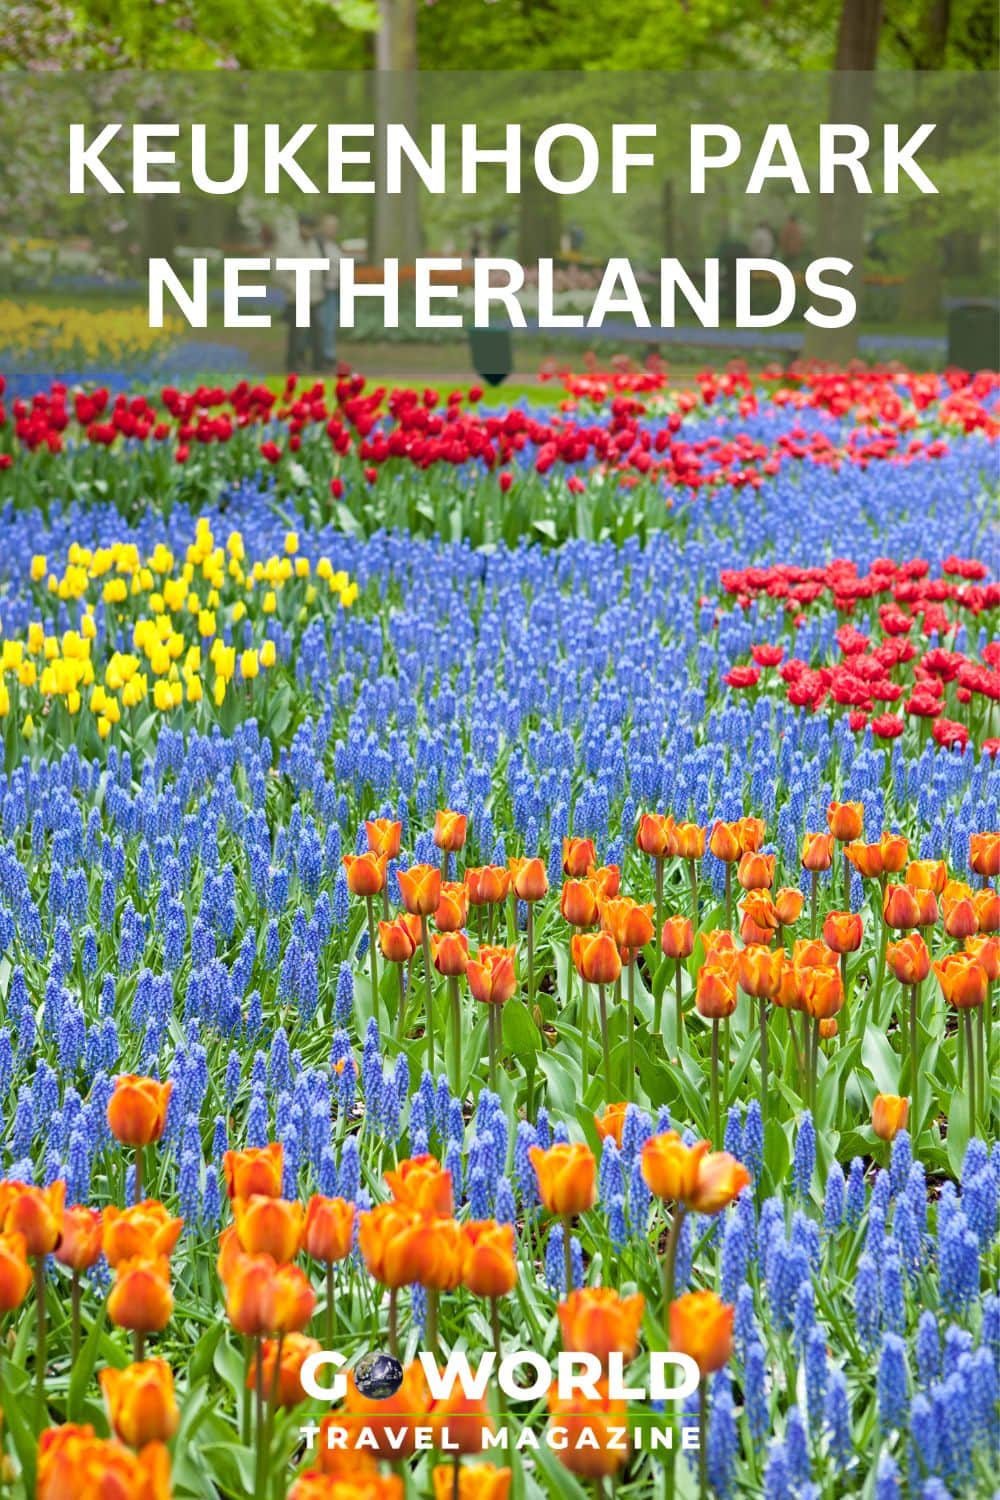 The Keukenhof, Netherlands is named the Garden of Europe and is a perfect spring excursion from Amsterdam to see the country's famous tulips. #Netherlands #Keukenhofpark